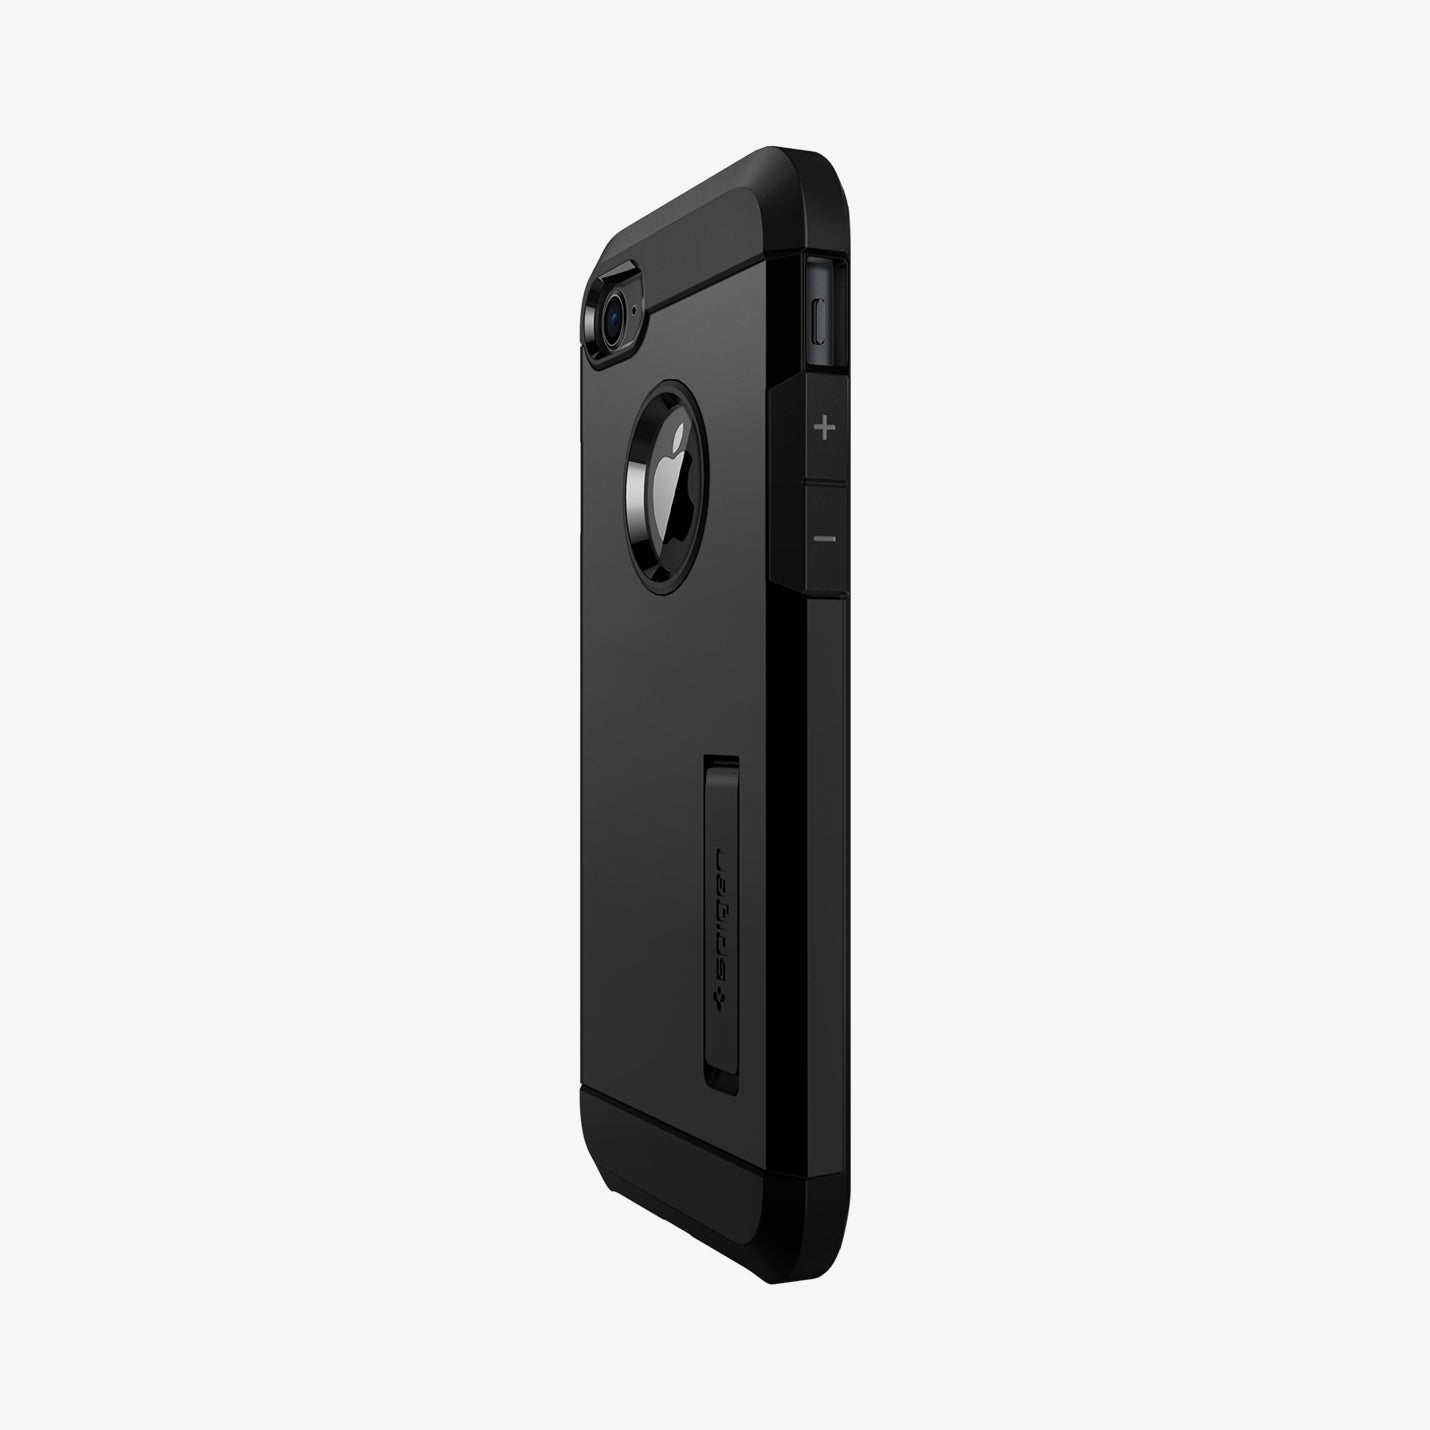 054CS22216 - iPhone 7 Case Tough Armor 2 in Black showing the partial back and side